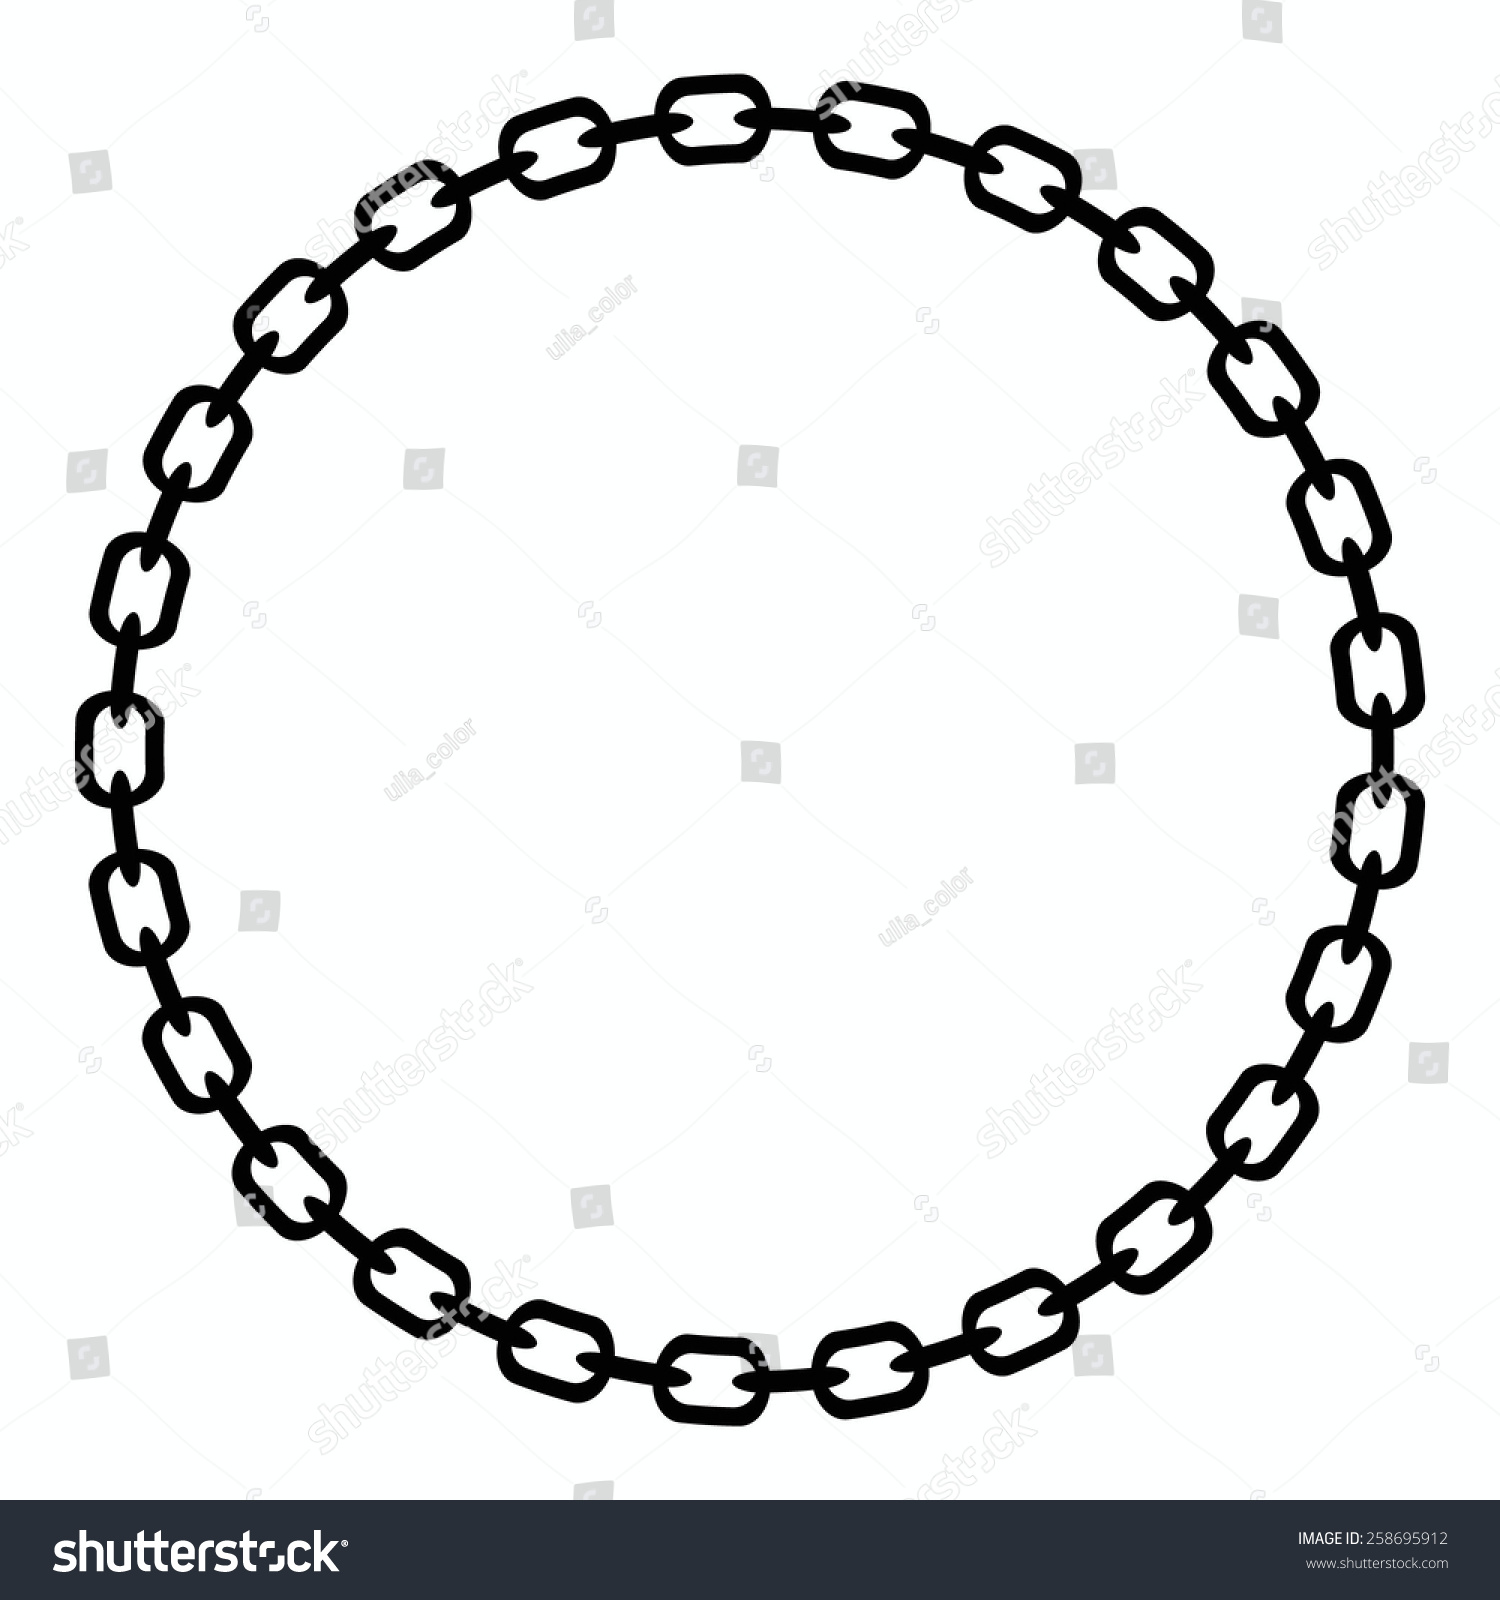 Chains Frame Vector Isolated Illustration Stock Vector (Royalty Free ...